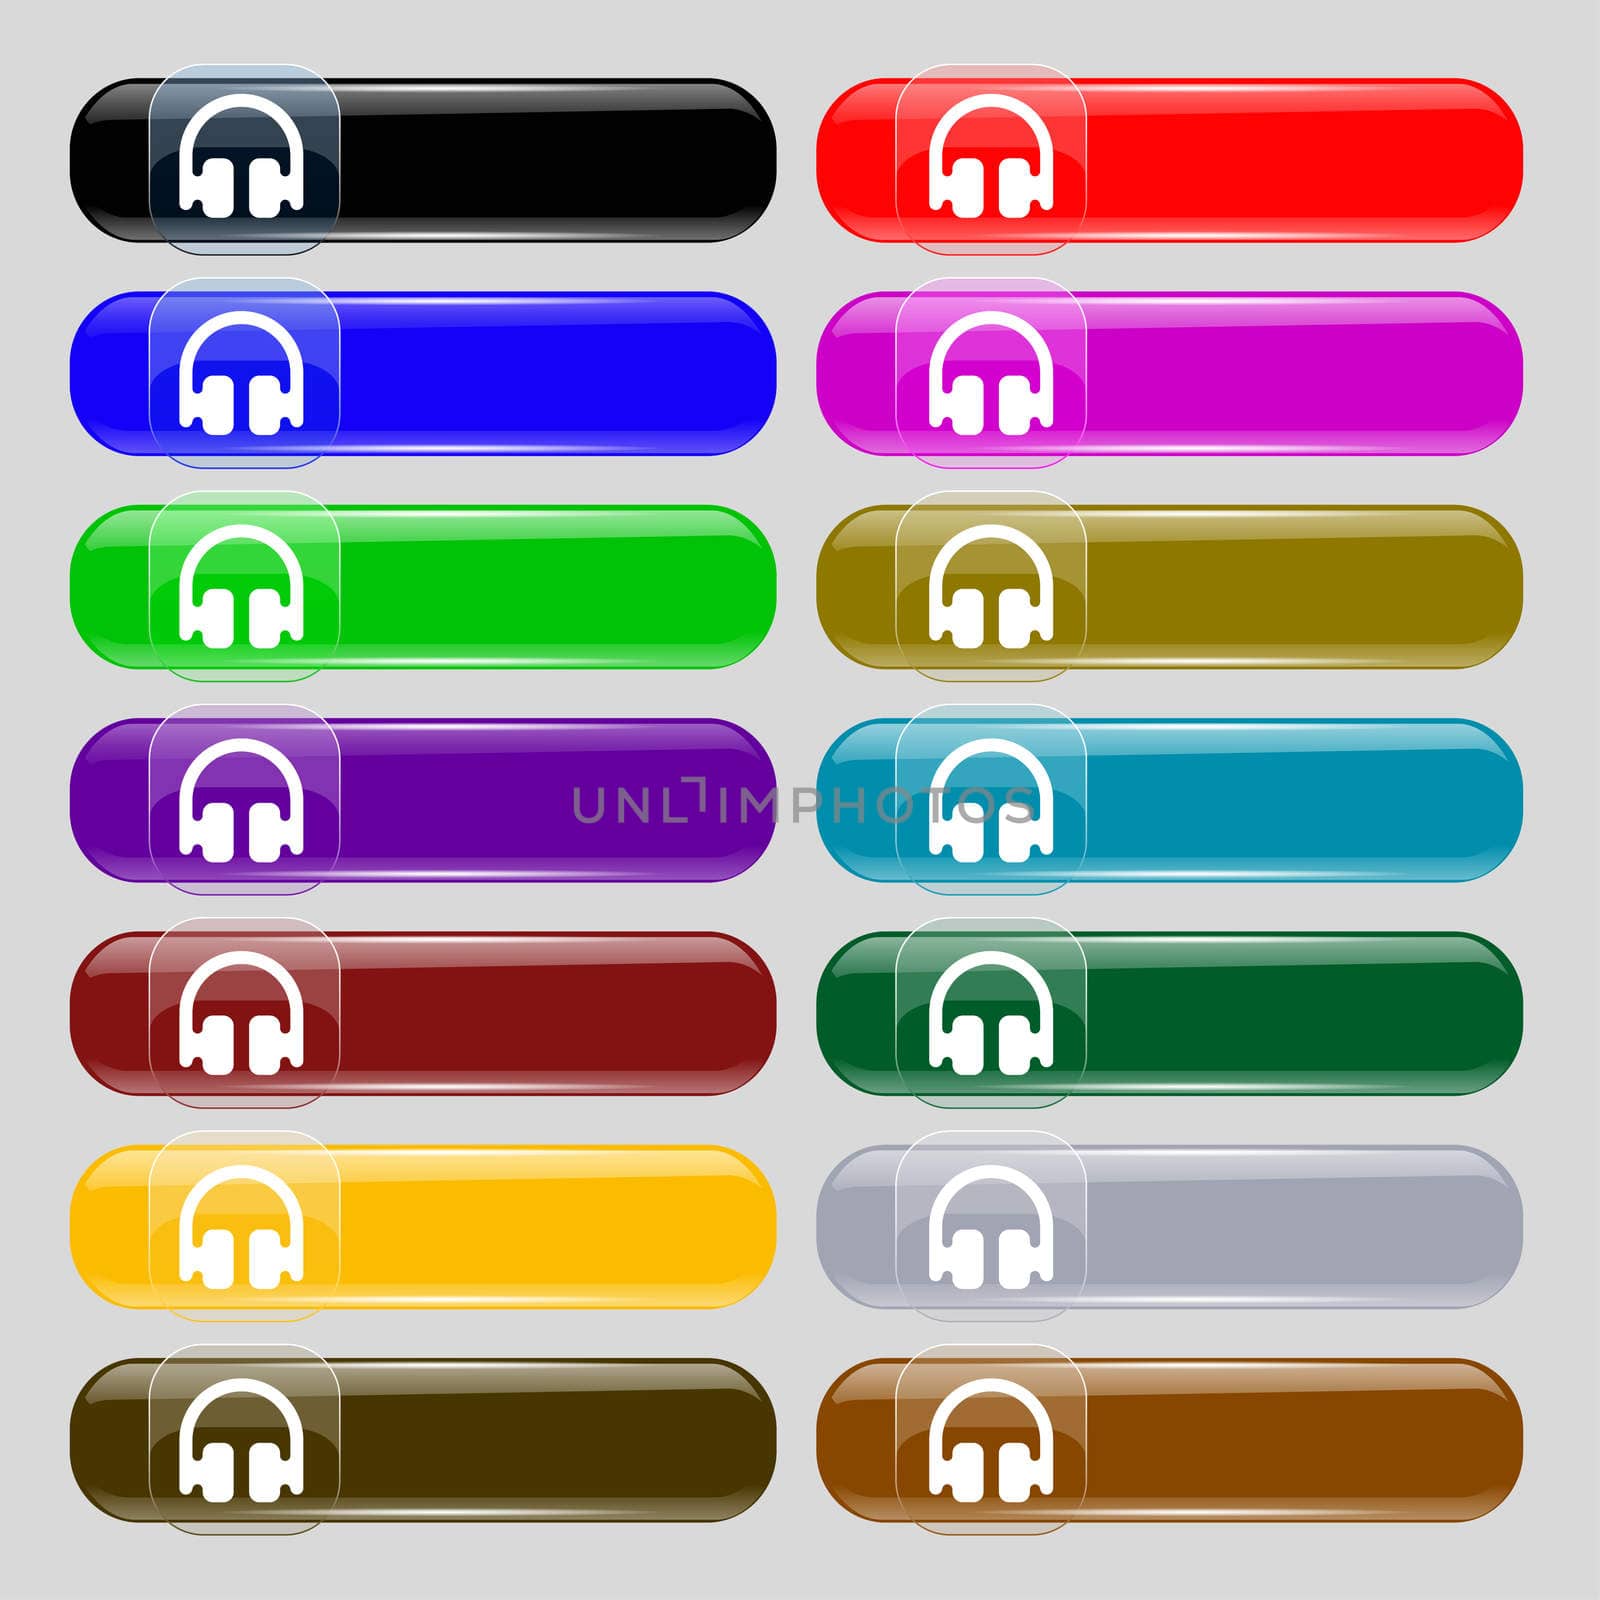 Headphones, Earphones icon sign. Set from fourteen multi-colored glass buttons with place for text. illustration